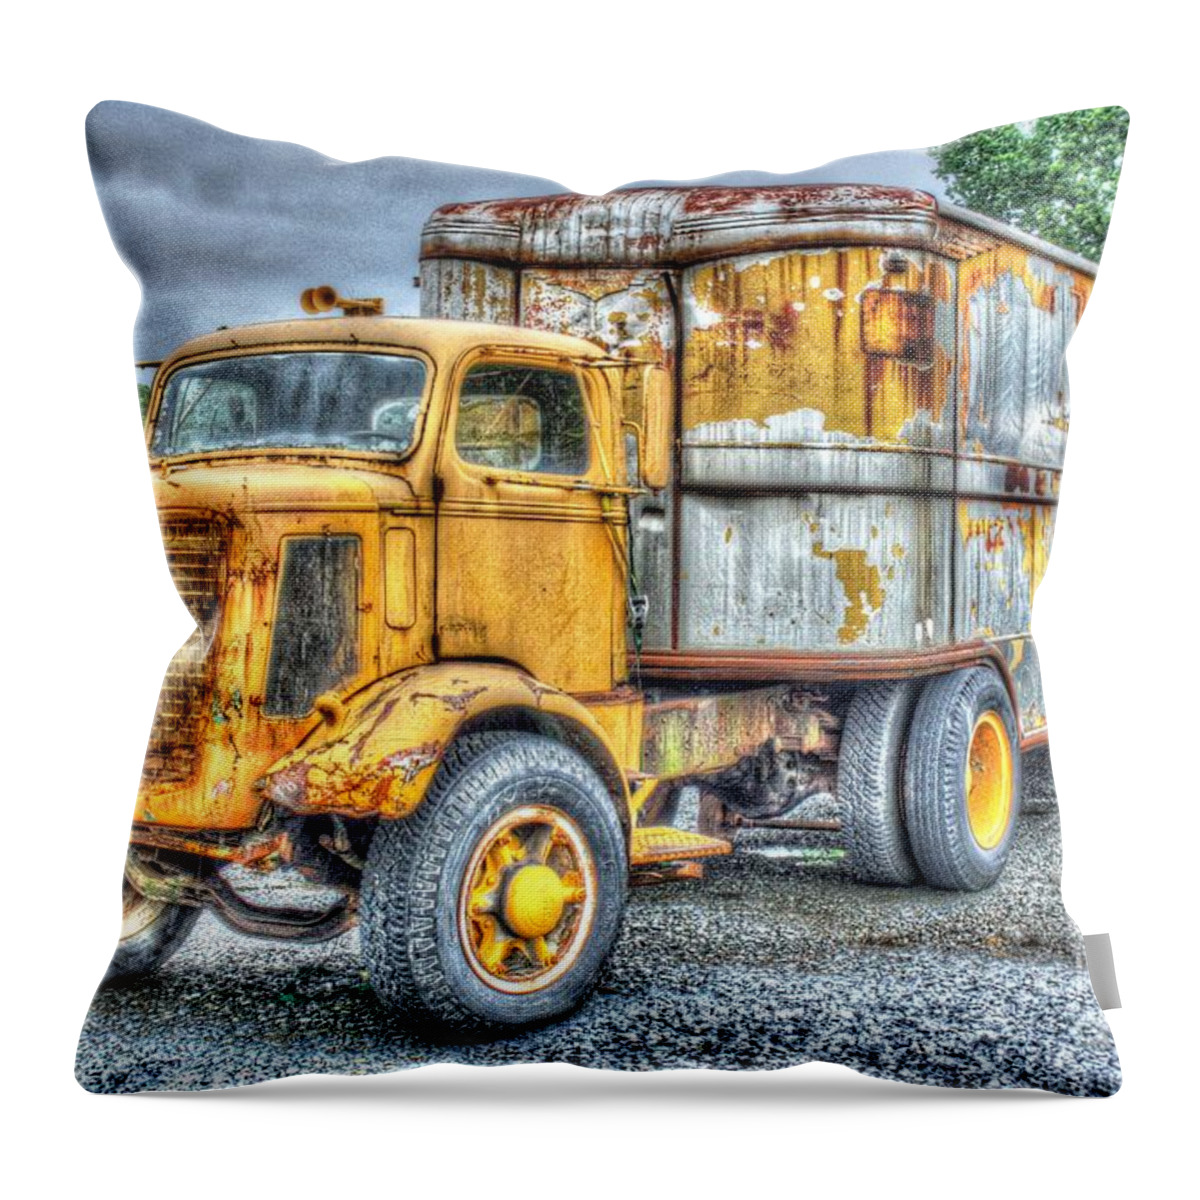 Antique Throw Pillow featuring the digital art Carrier by Dan Stone